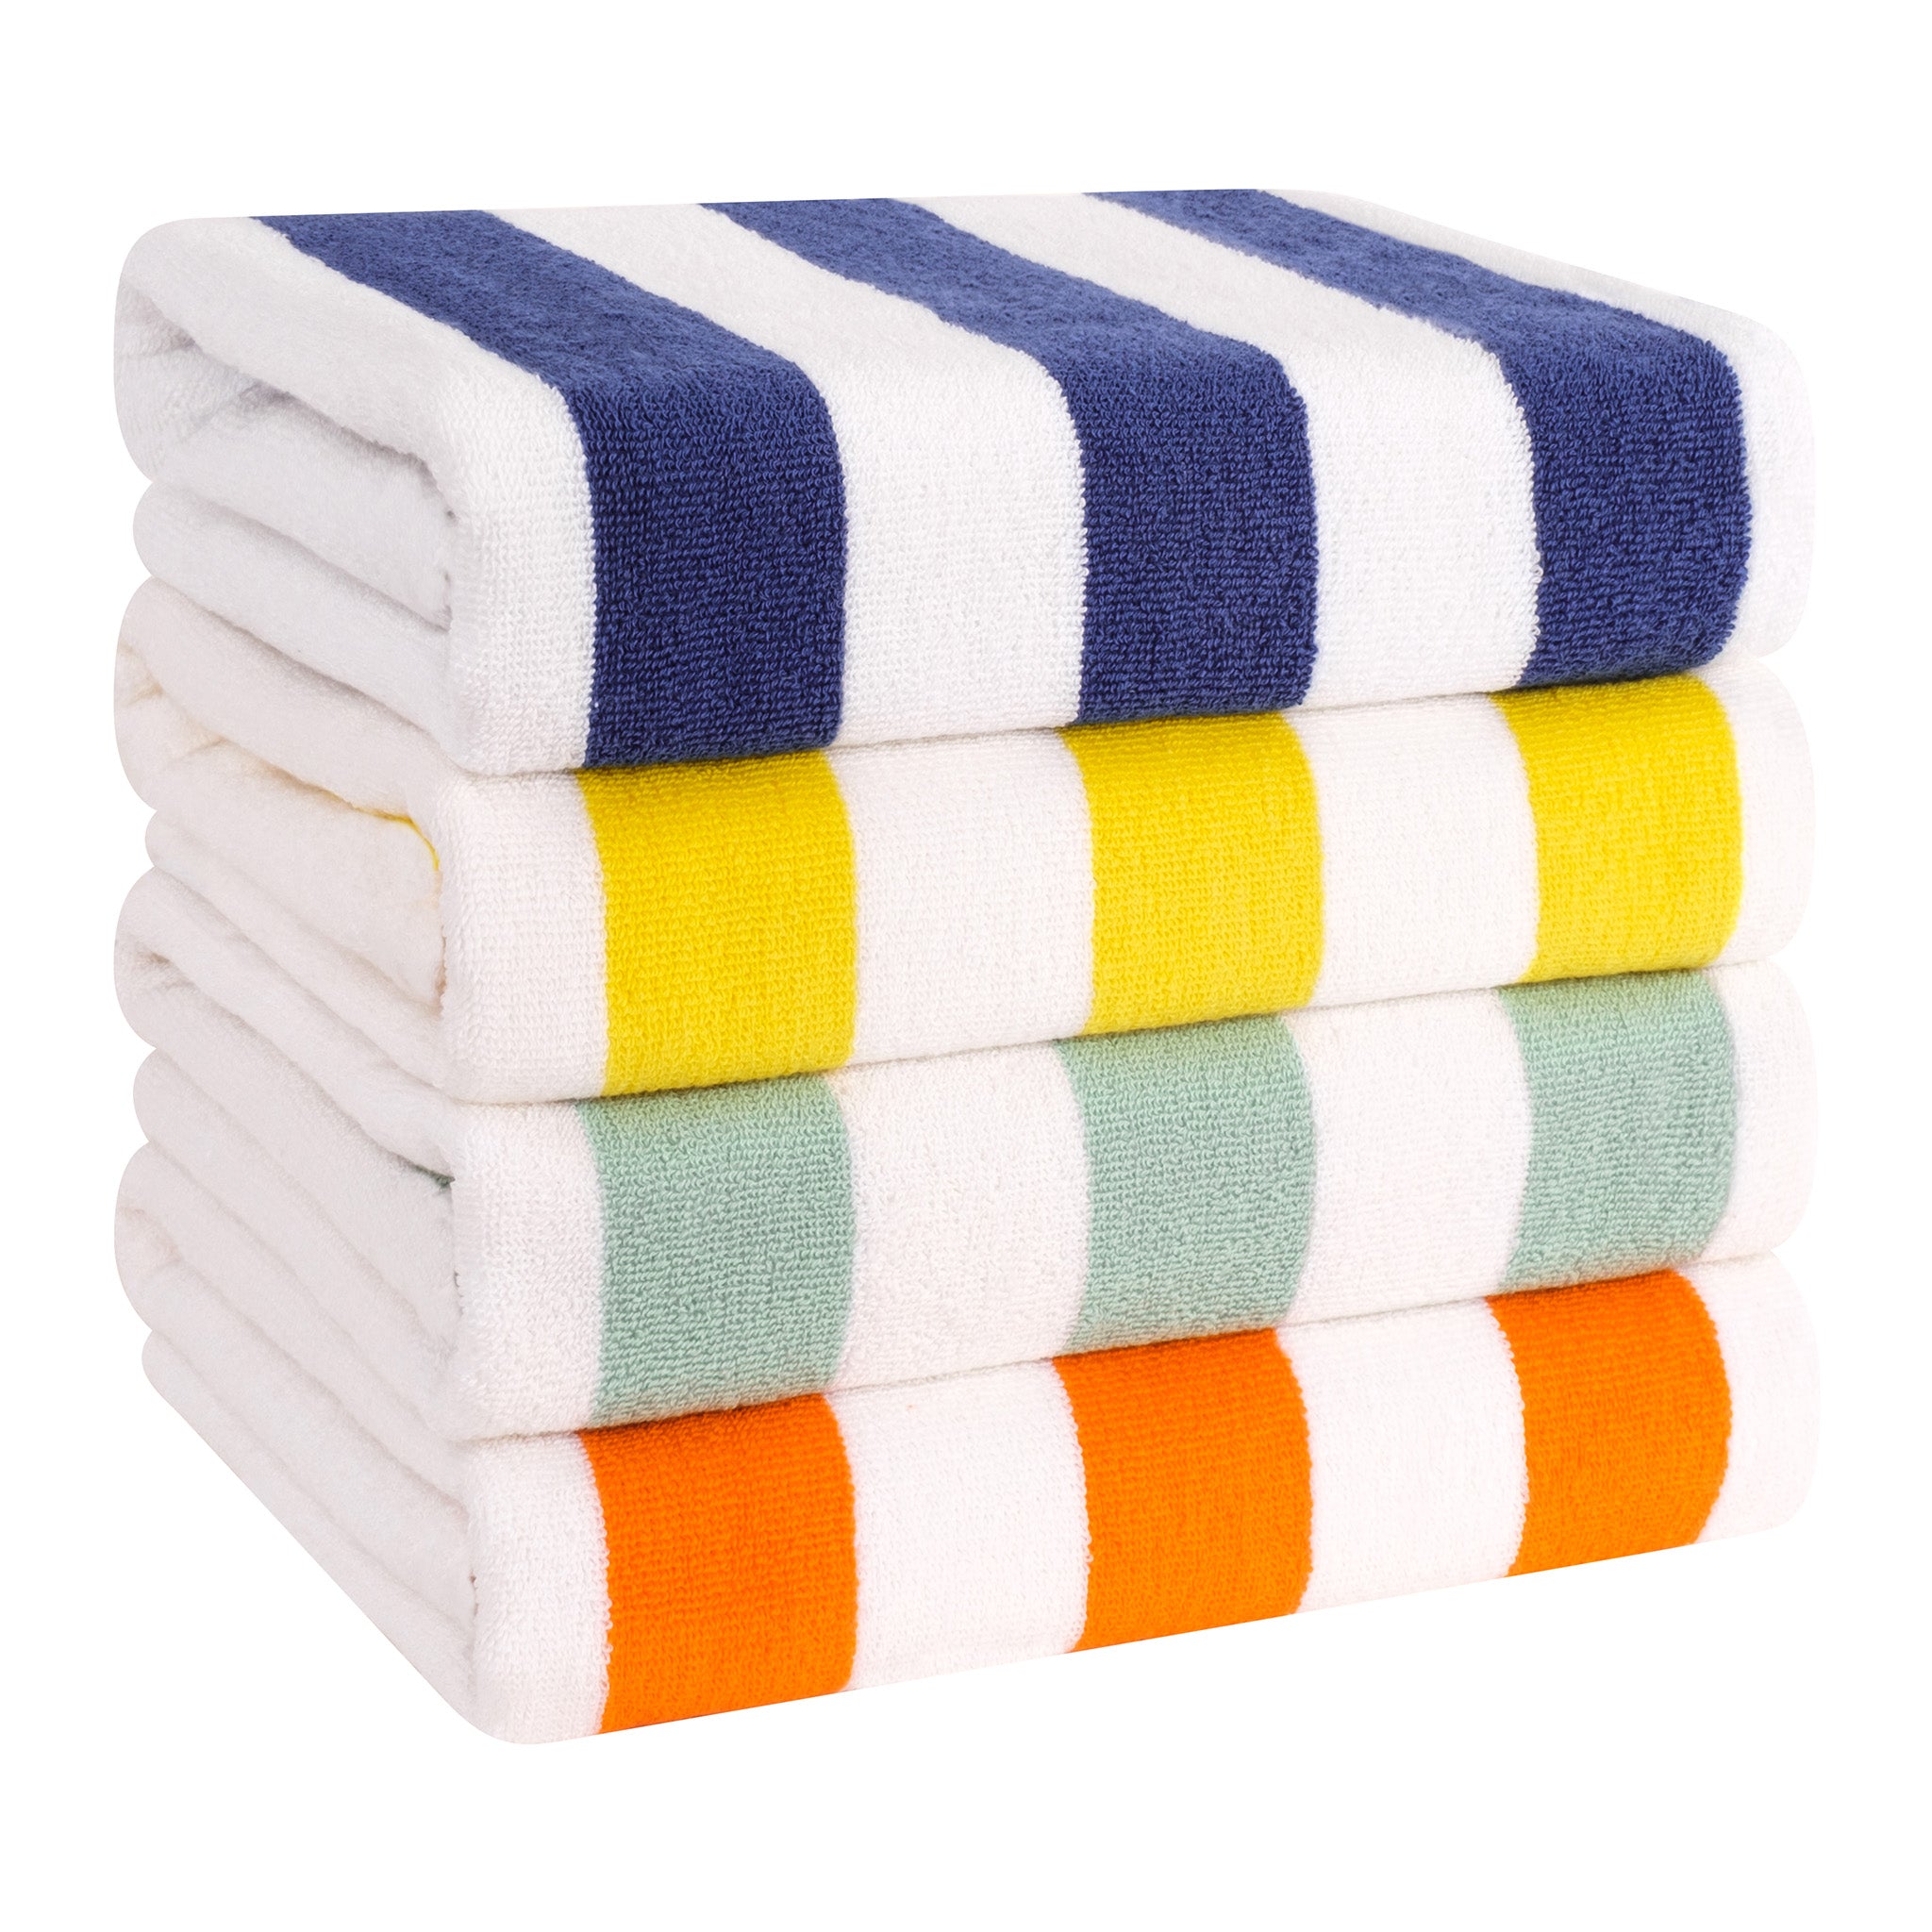 t & l towel and linen mart Towel and Linen Mart 100% Cotton - Wash Cloth  Set - Pack of 24, Flannel Face Cloths, Highly Absorbent and Soft Feel